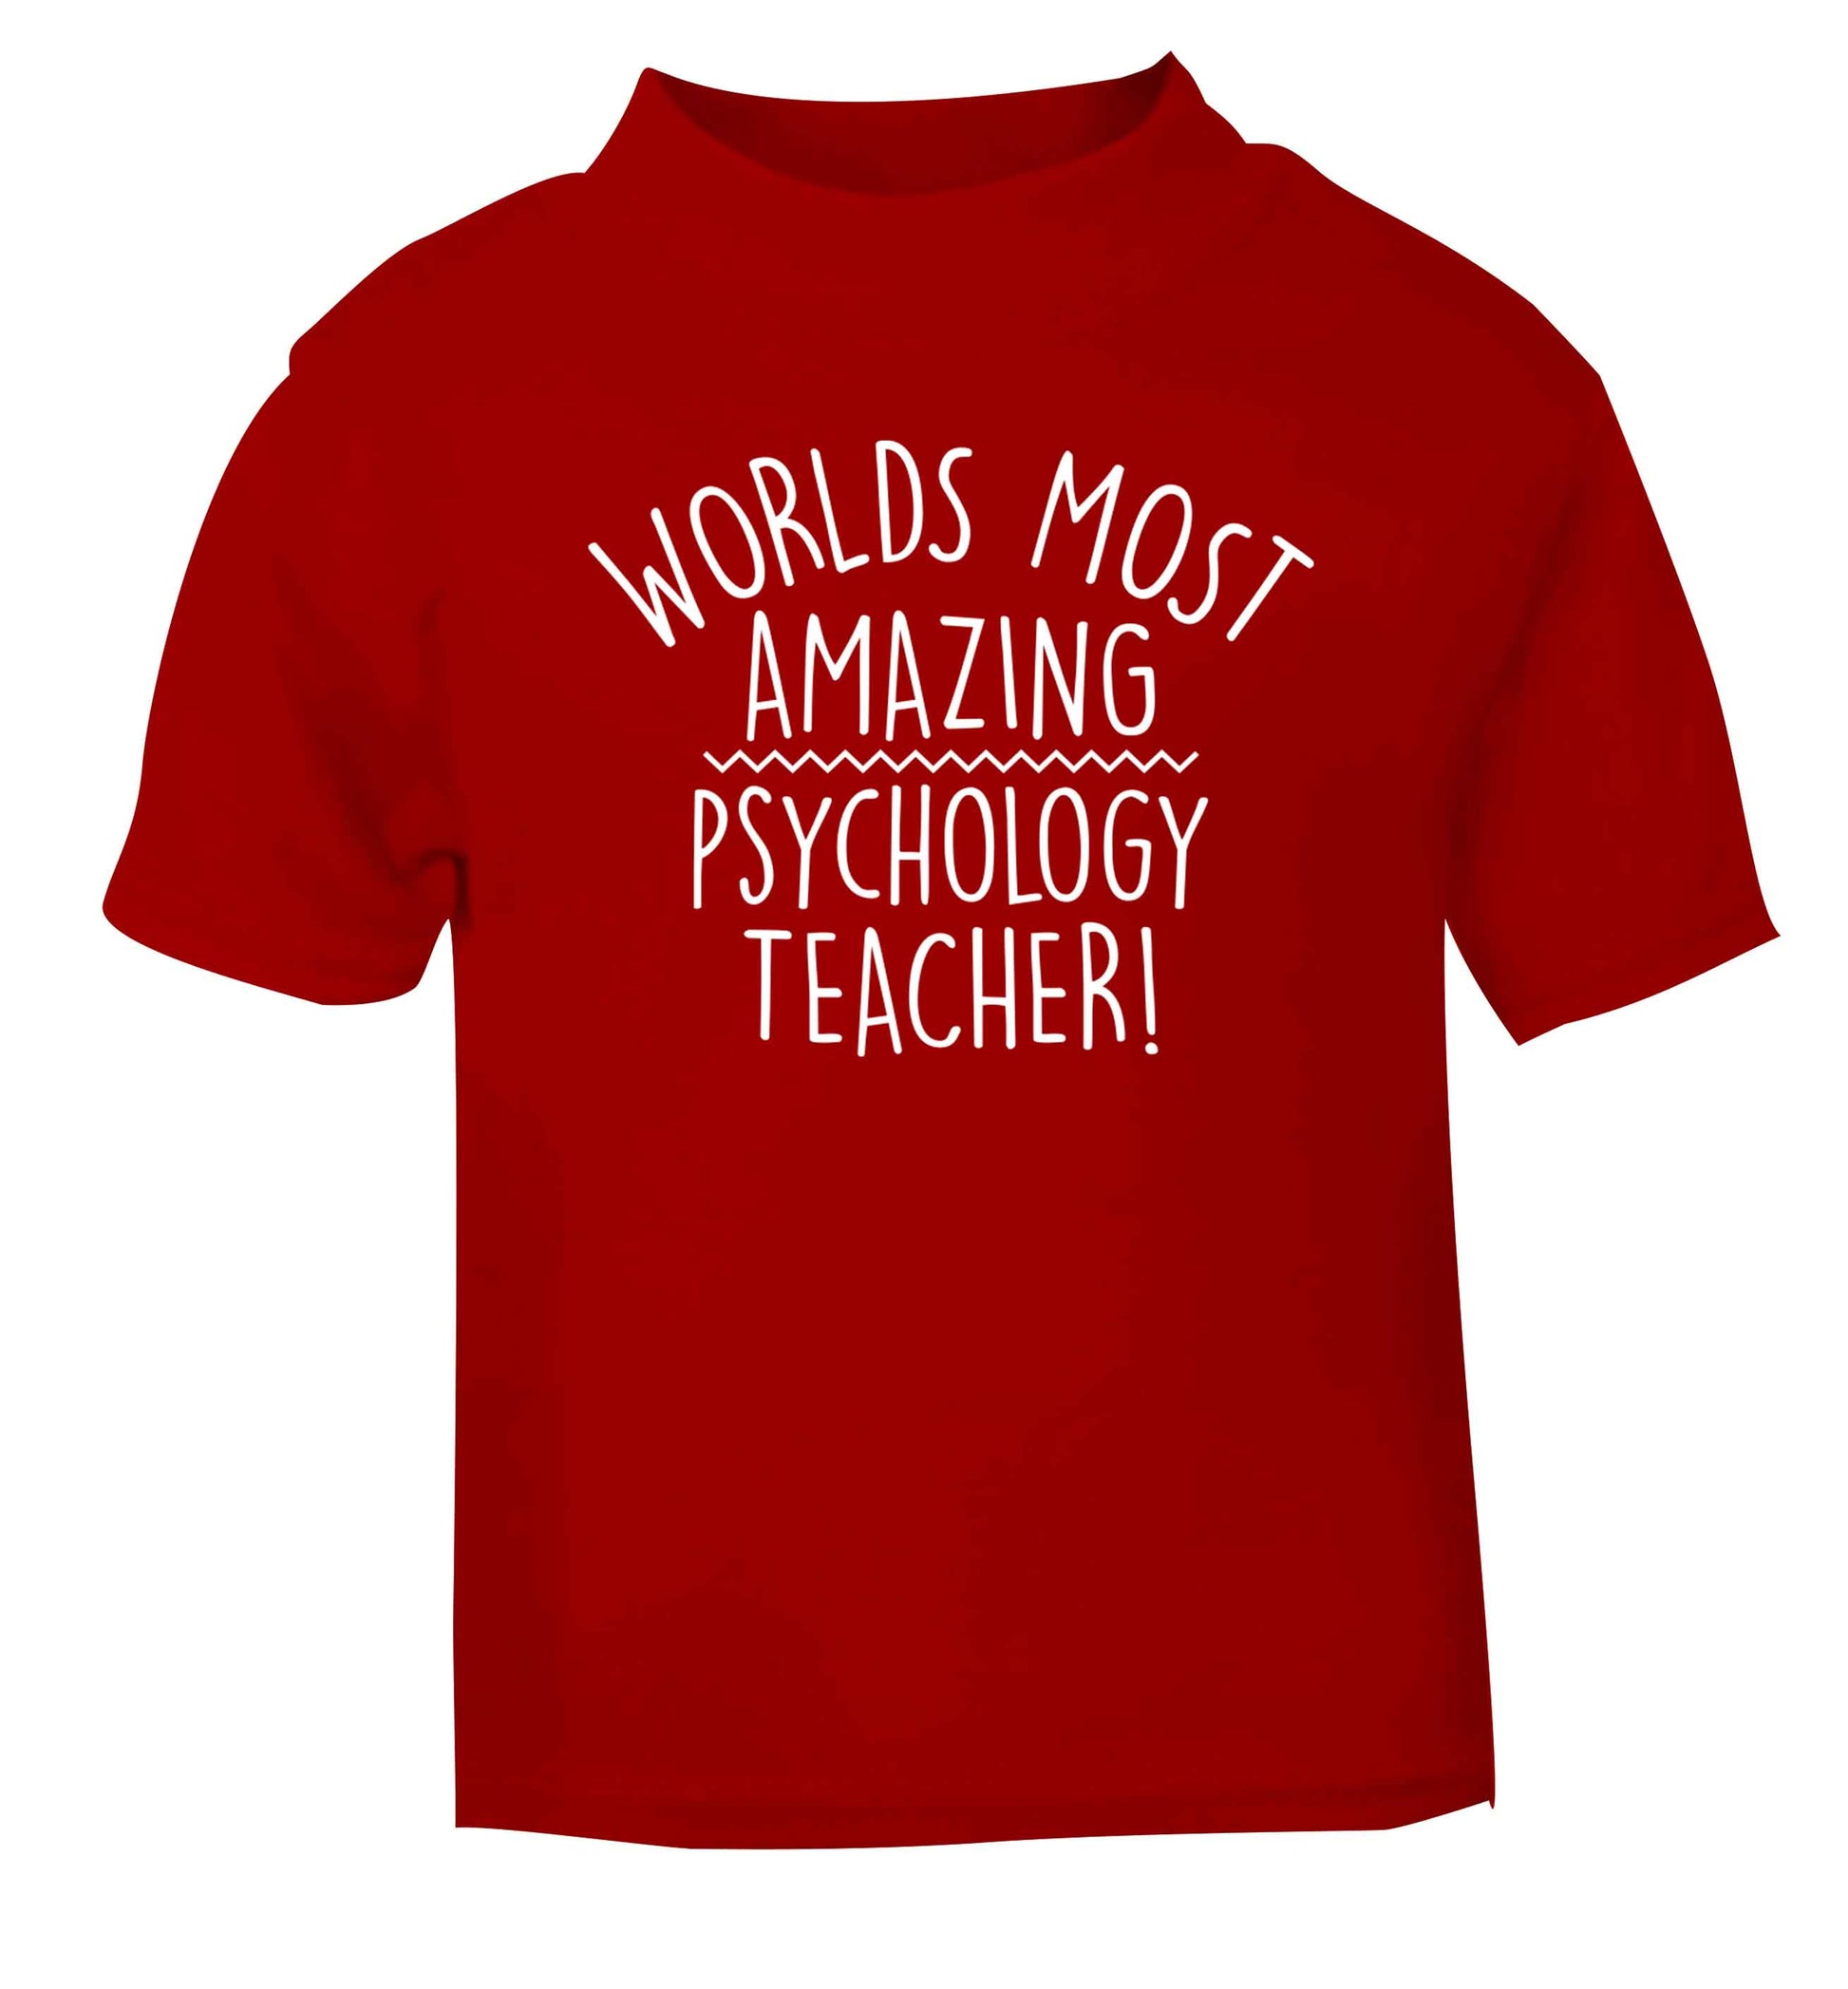 Worlds most amazing psychology teacher red baby toddler Tshirt 2 Years